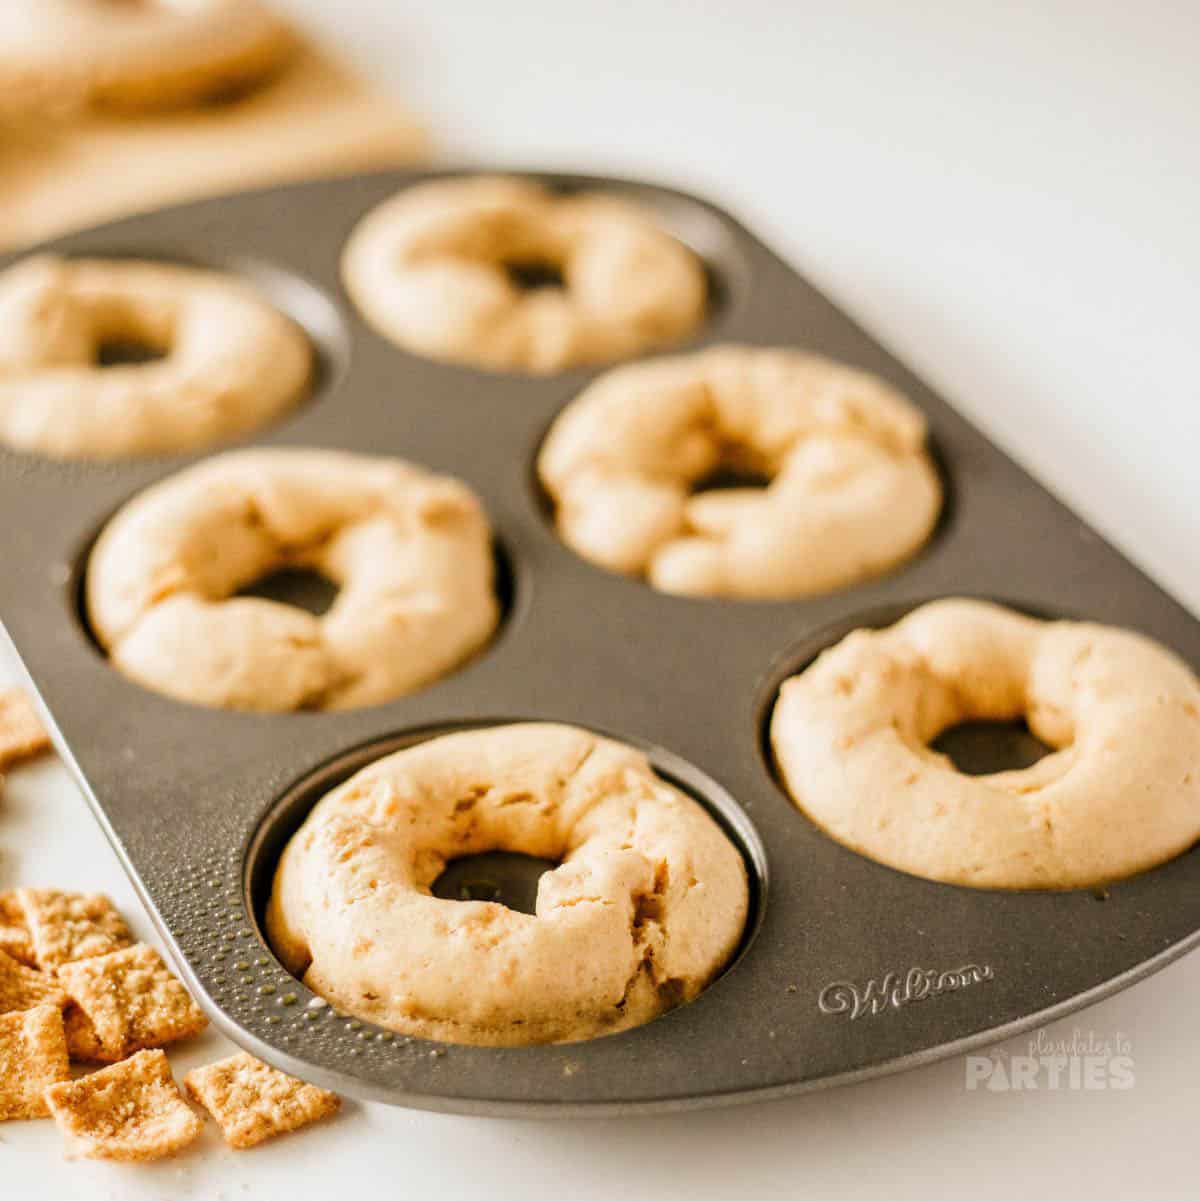 Homemade donuts in a pan after baking.